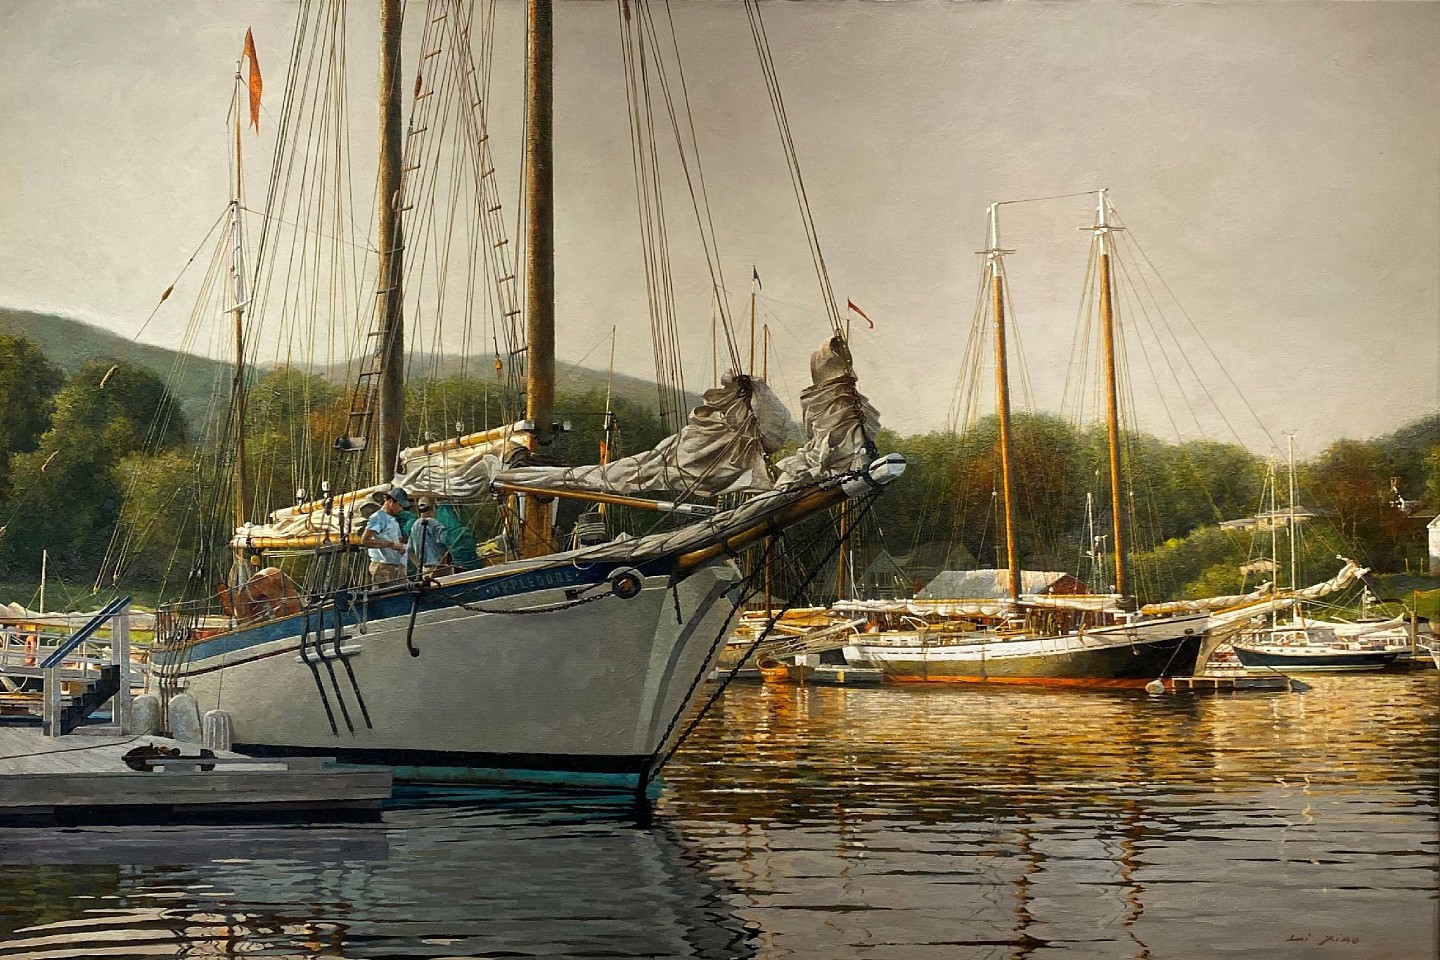 Li Xiao, The Harbour Under the Sun, 2022
oil on canvas, 38 x 58 in. (96.5 x 147.3 cm)
LX042202